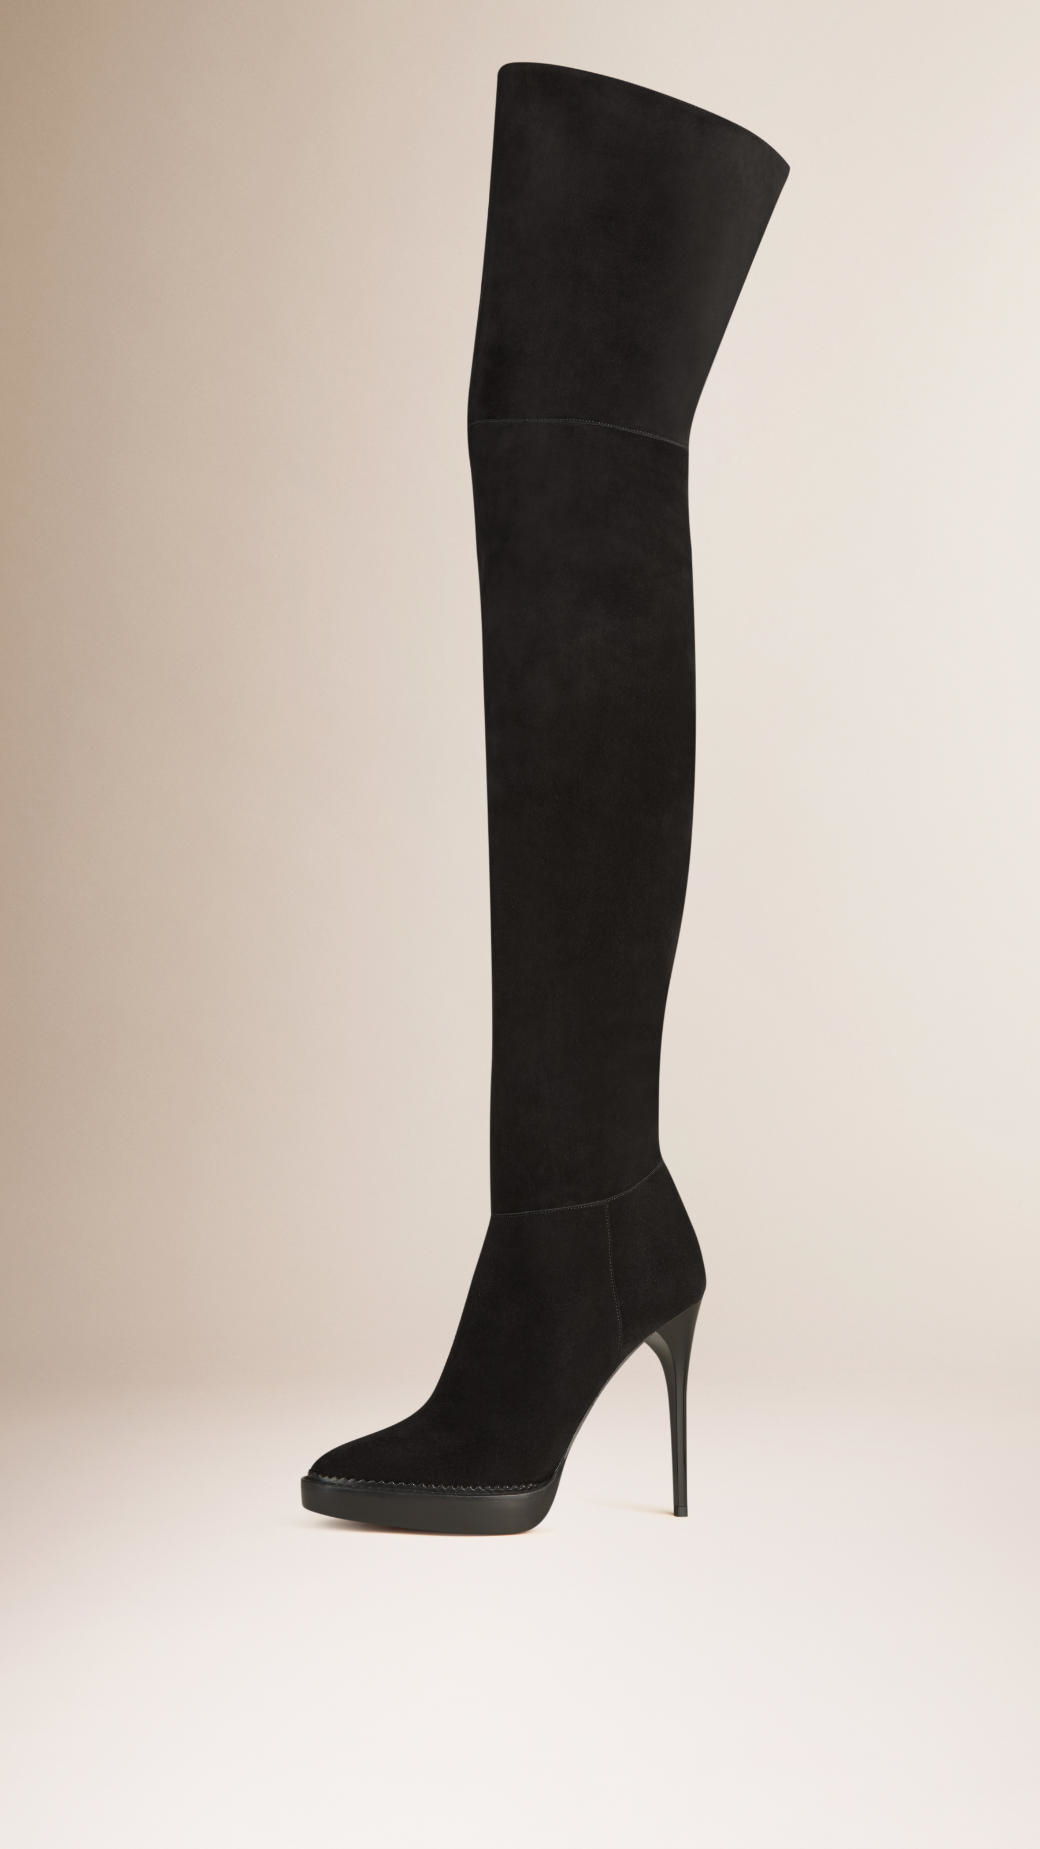 Burberry Over-The-Knee Boots in Black - Lyst